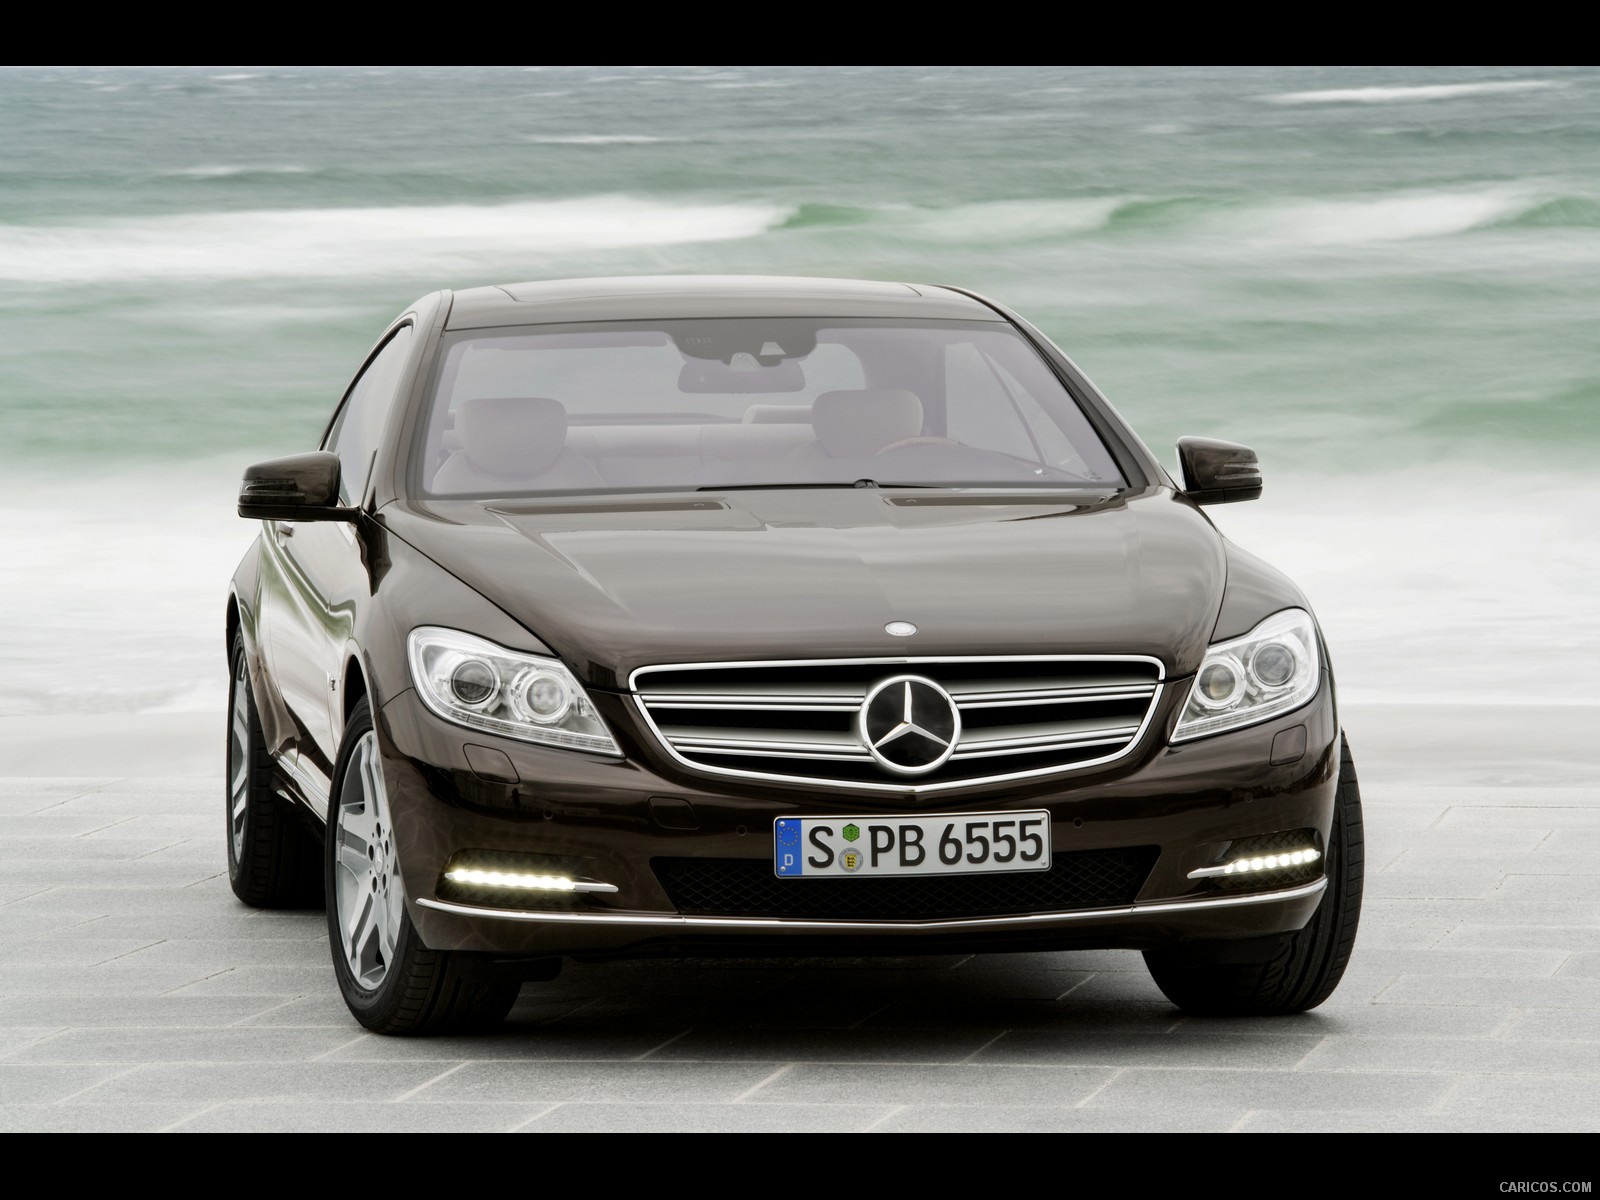 Mercedes Benz CL-Class (2011)  - Front Angle , #5 of 34